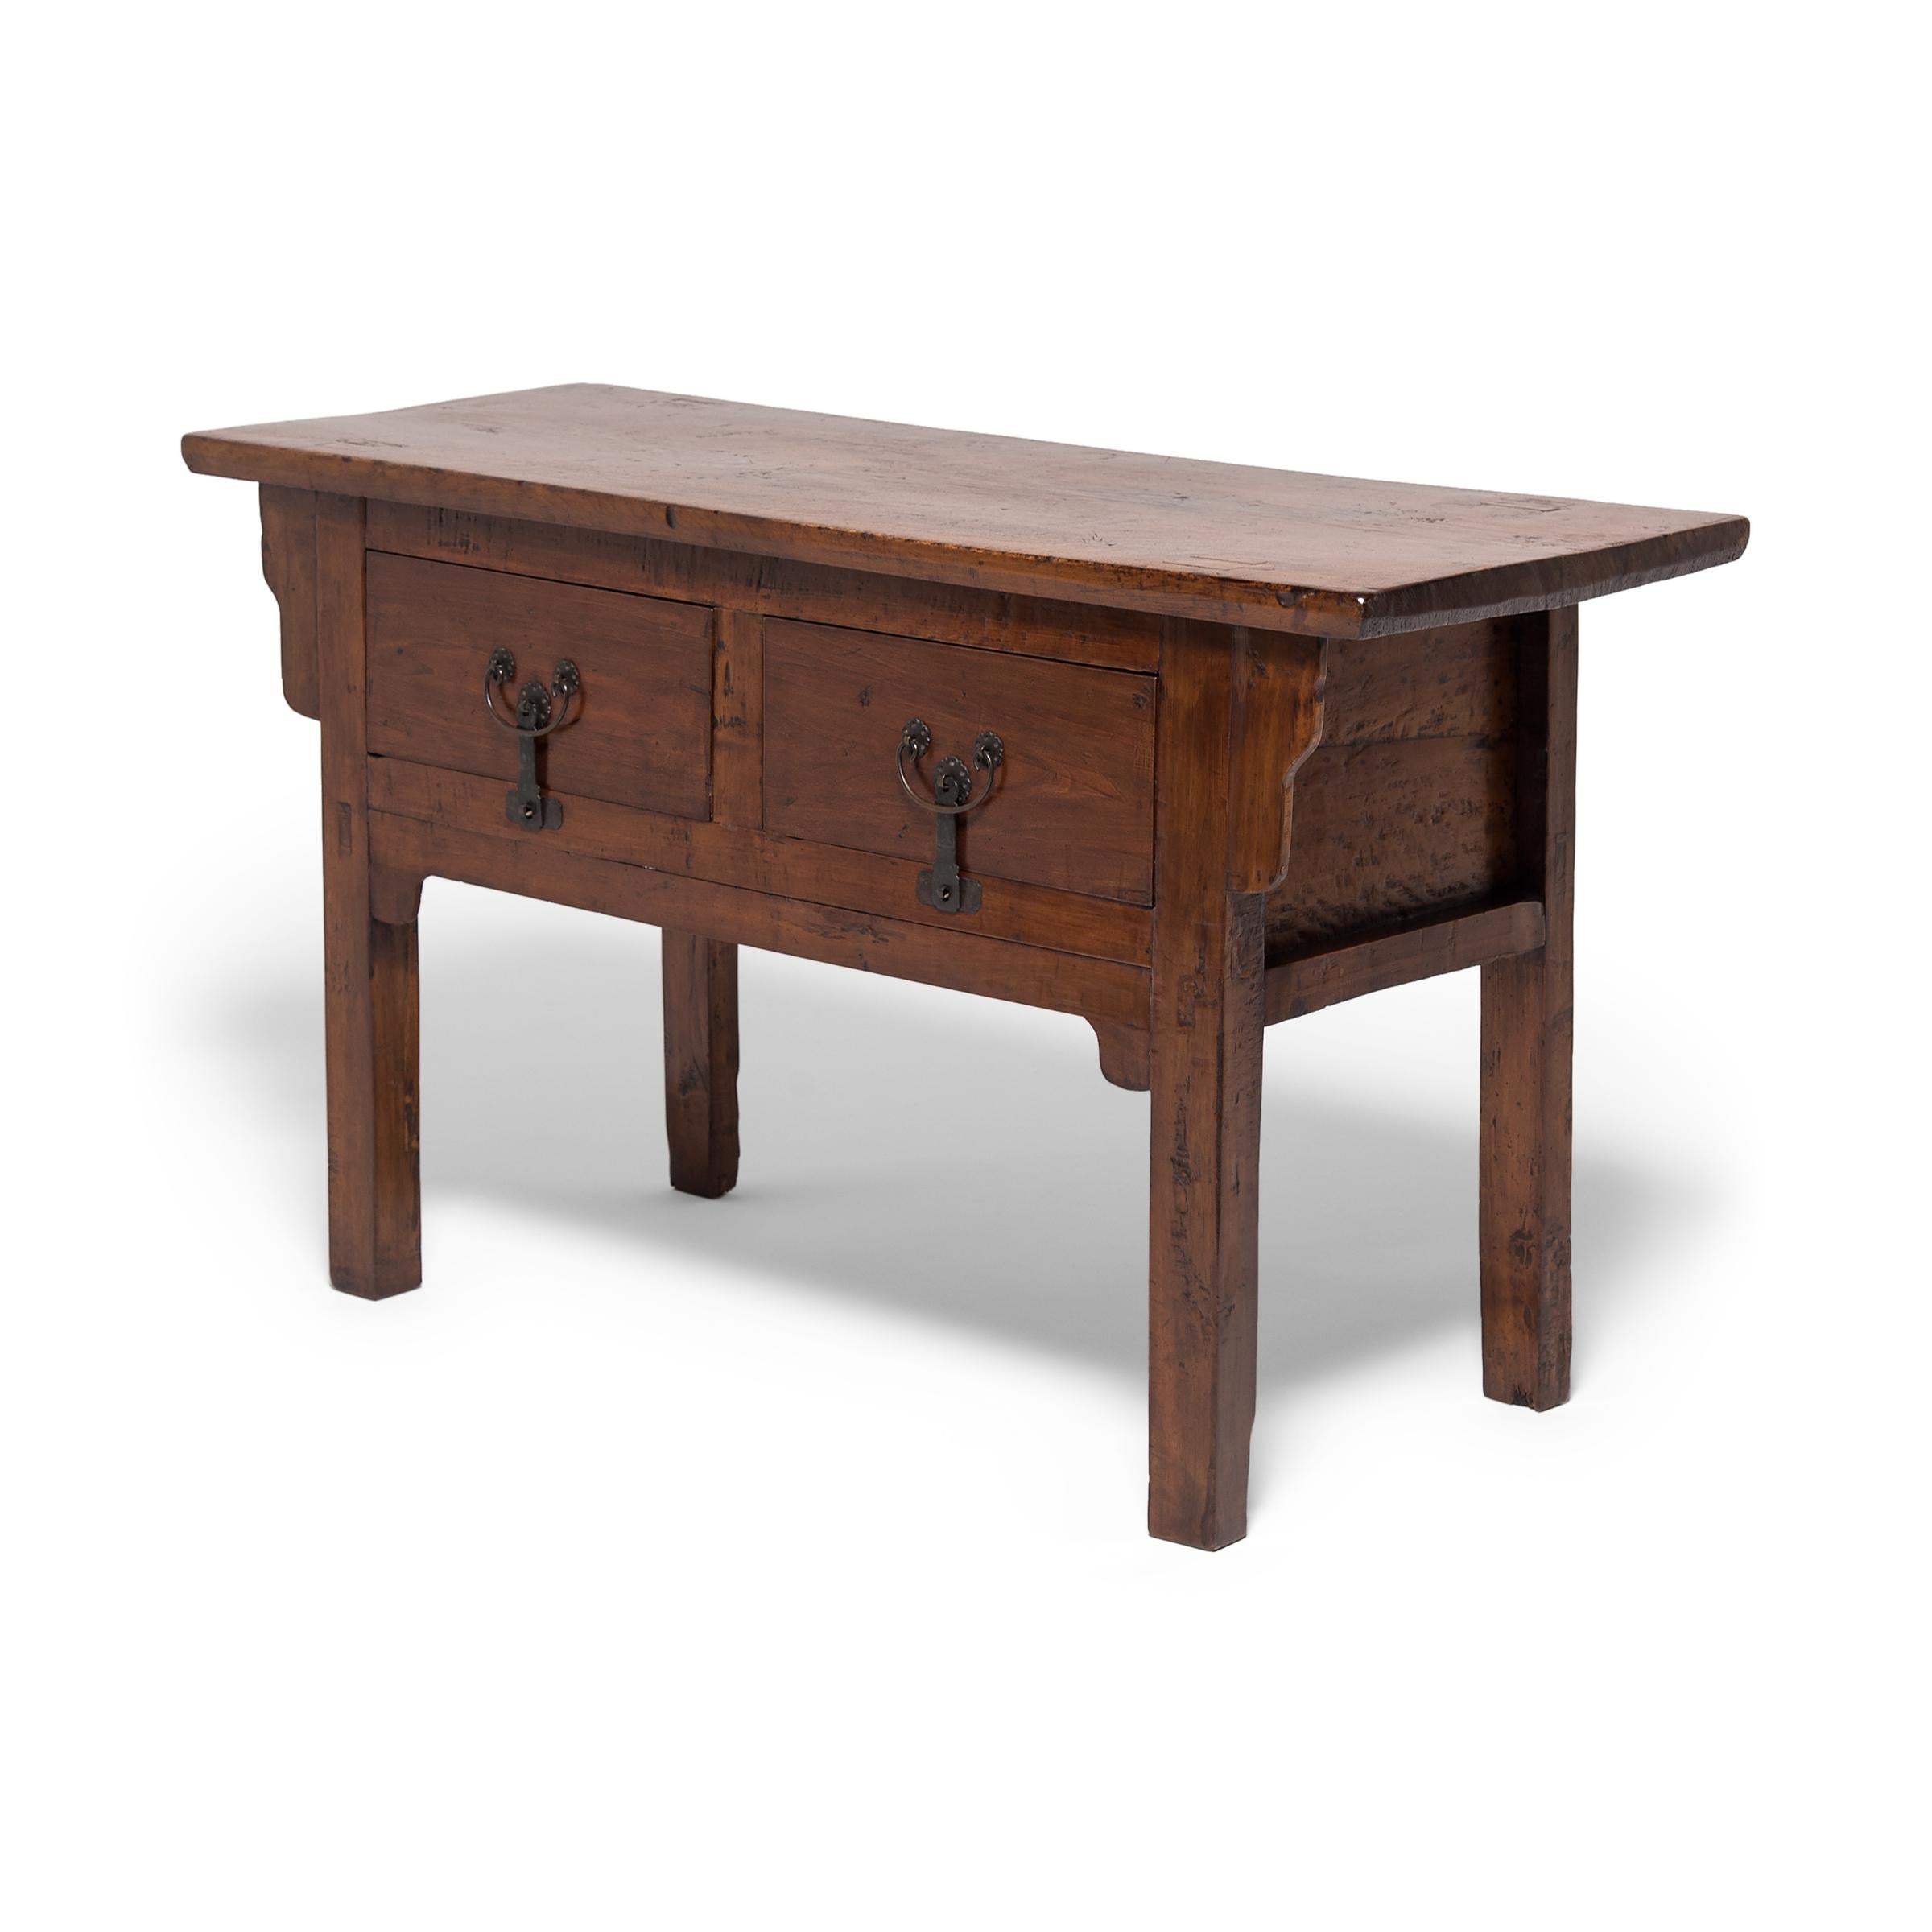 Cloaked in a beautifully aged layer of clear lacquer, this earnest table speaks volumes about simple pride. The console's clean lines and warm, open-grained walnut texture speak to the universal appeal of rustic interiors. Built by an artisan in